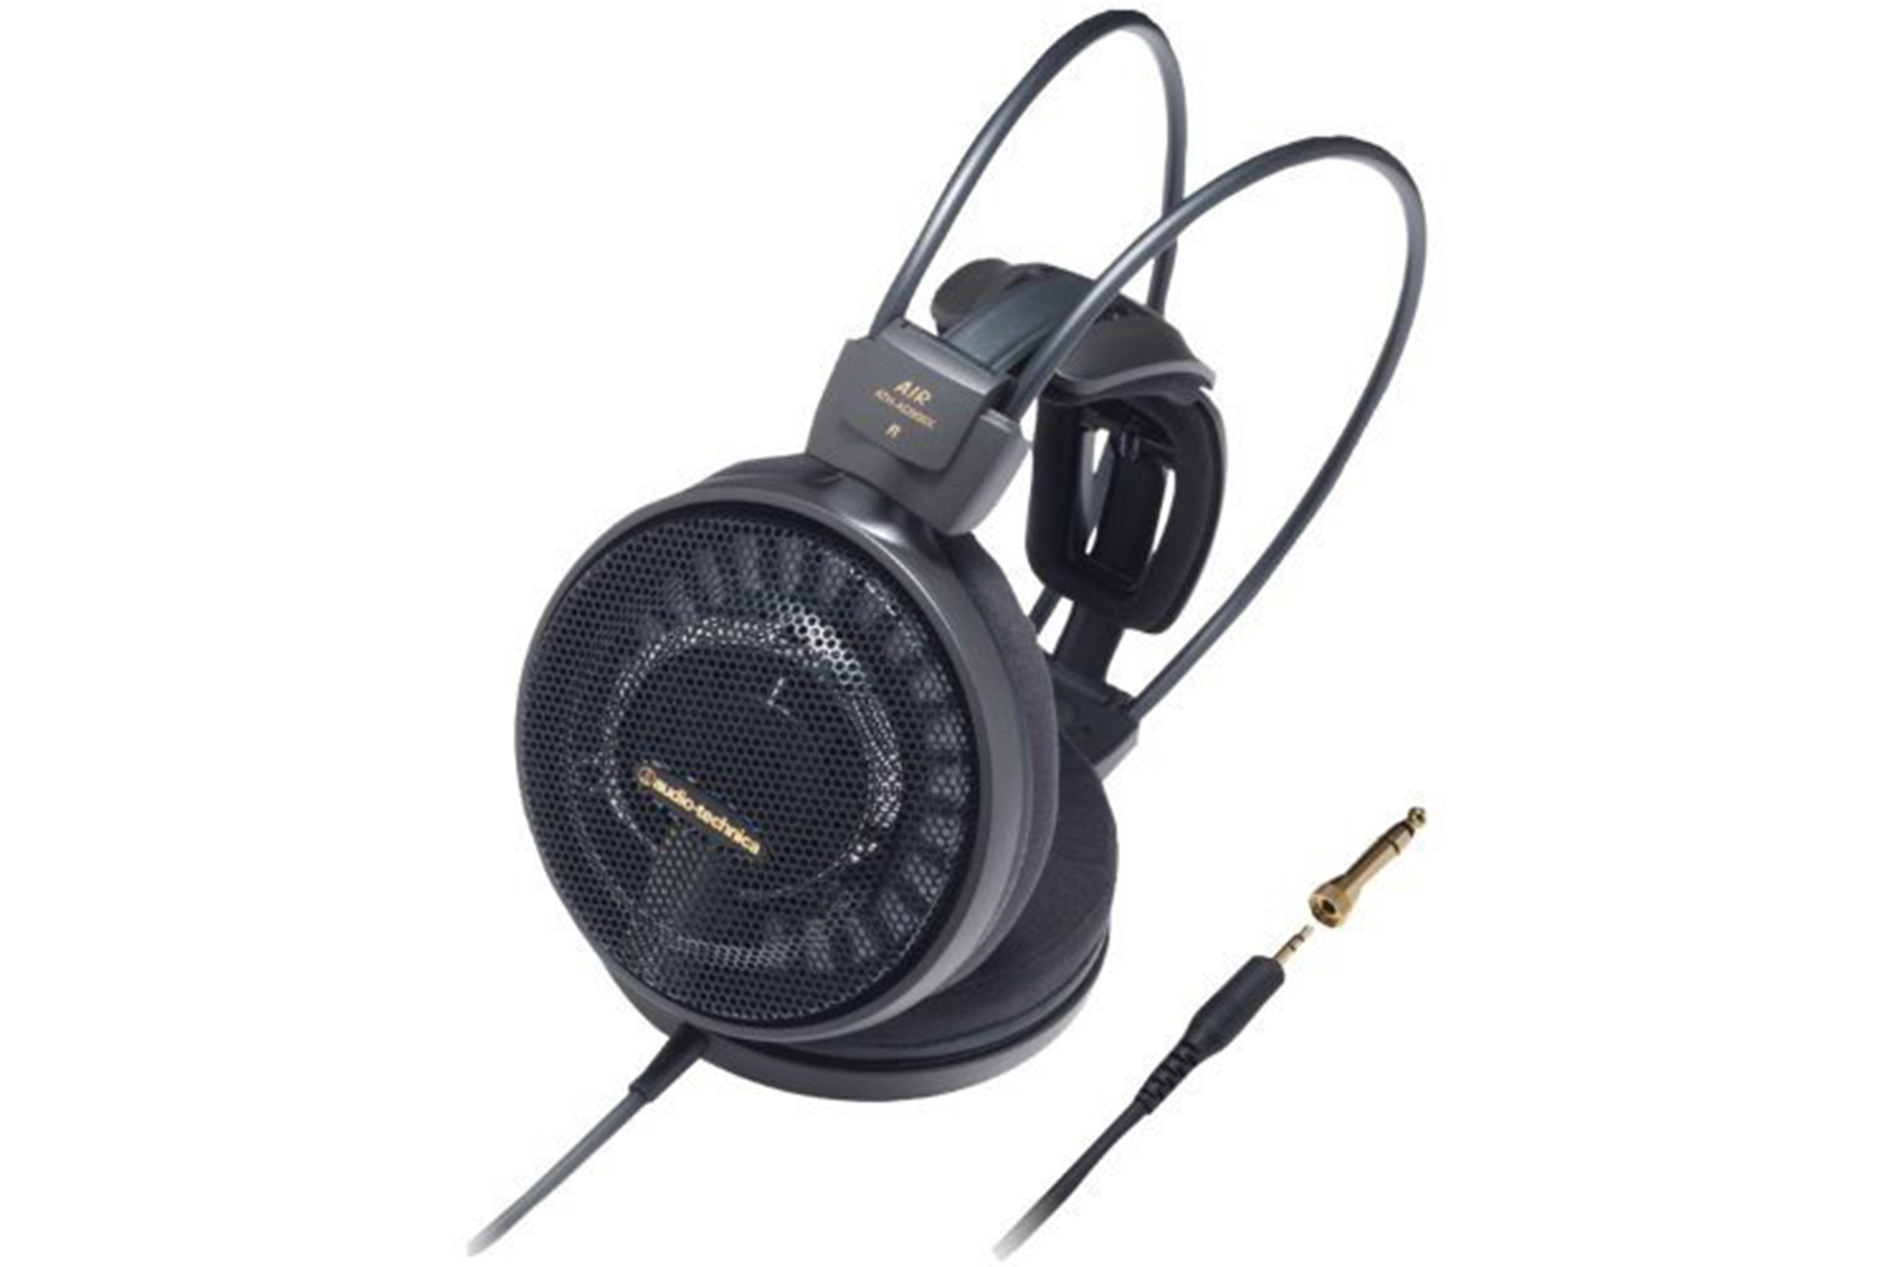 Audio-Technica ATH-AD900x headphones angled with the cable showing against a white background.